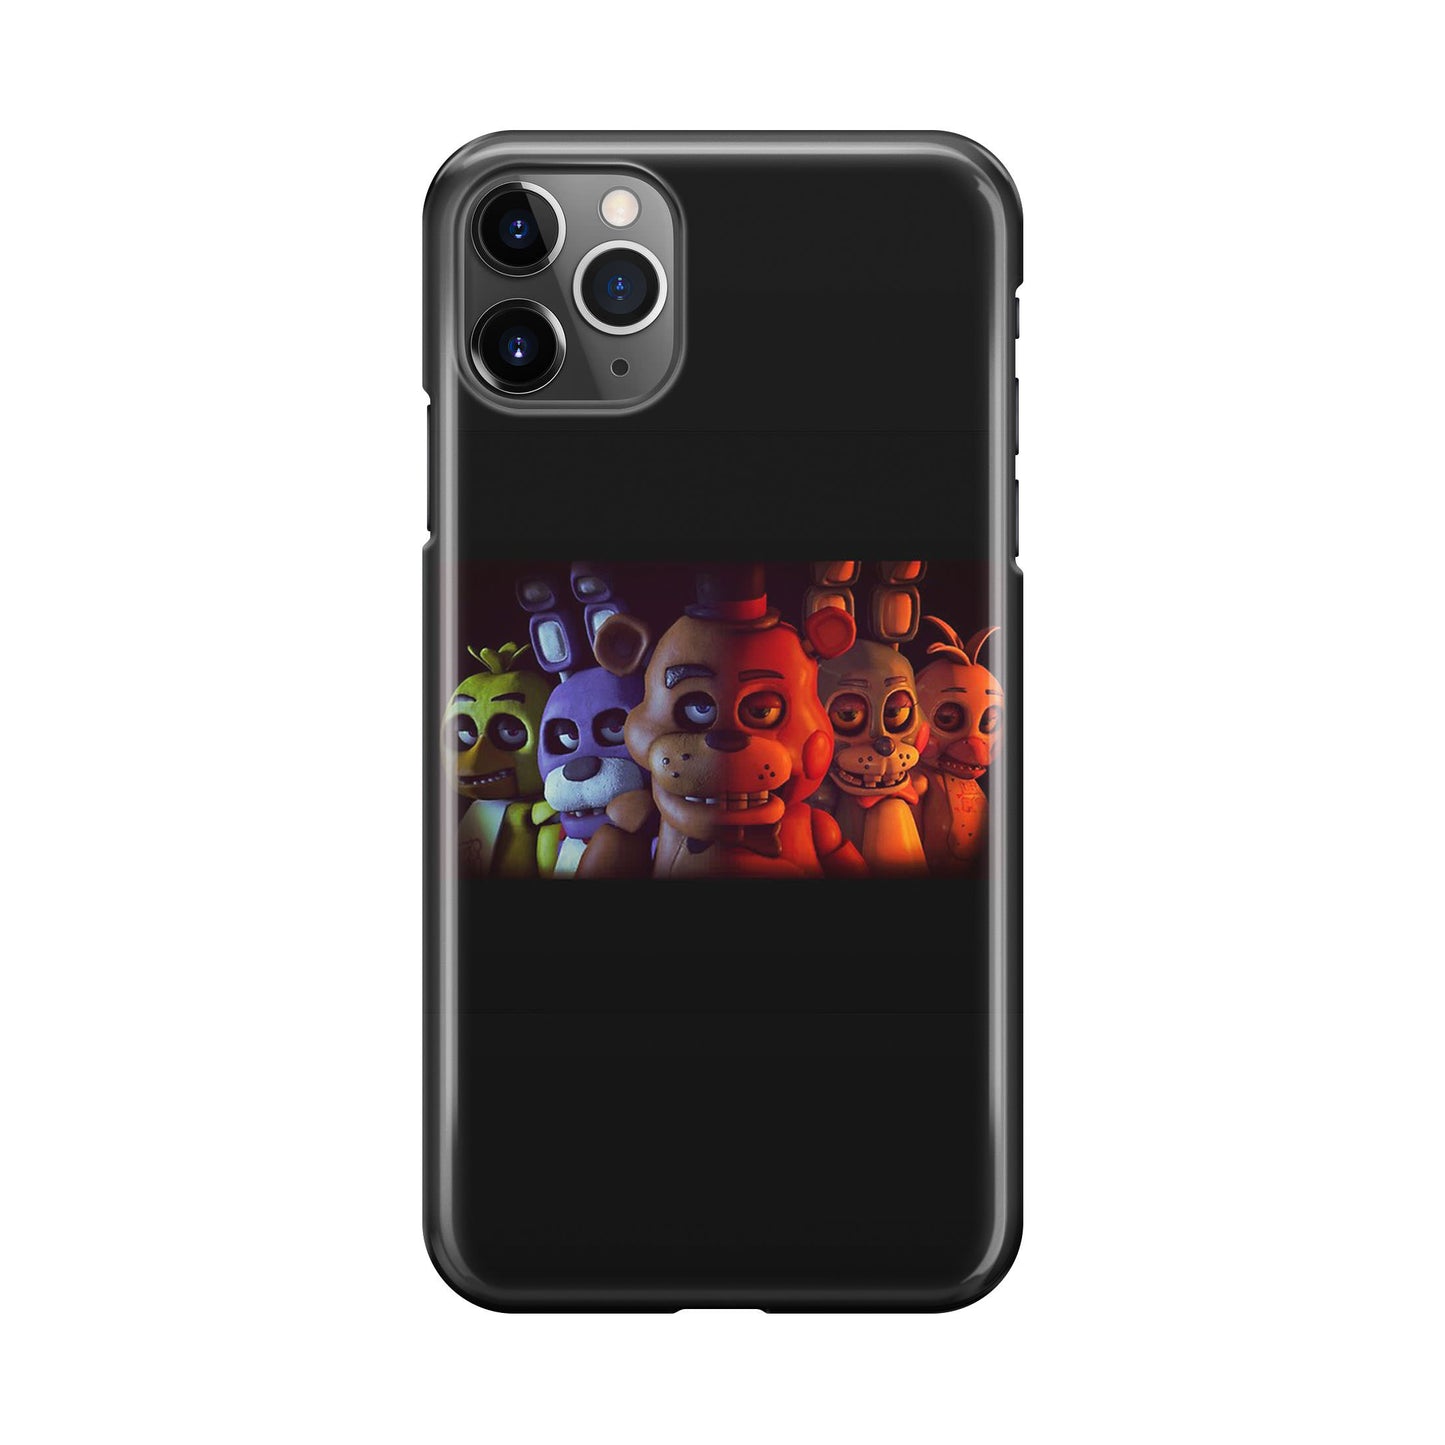 Five Nights at Freddy's 2 iPhone 11 Pro Case